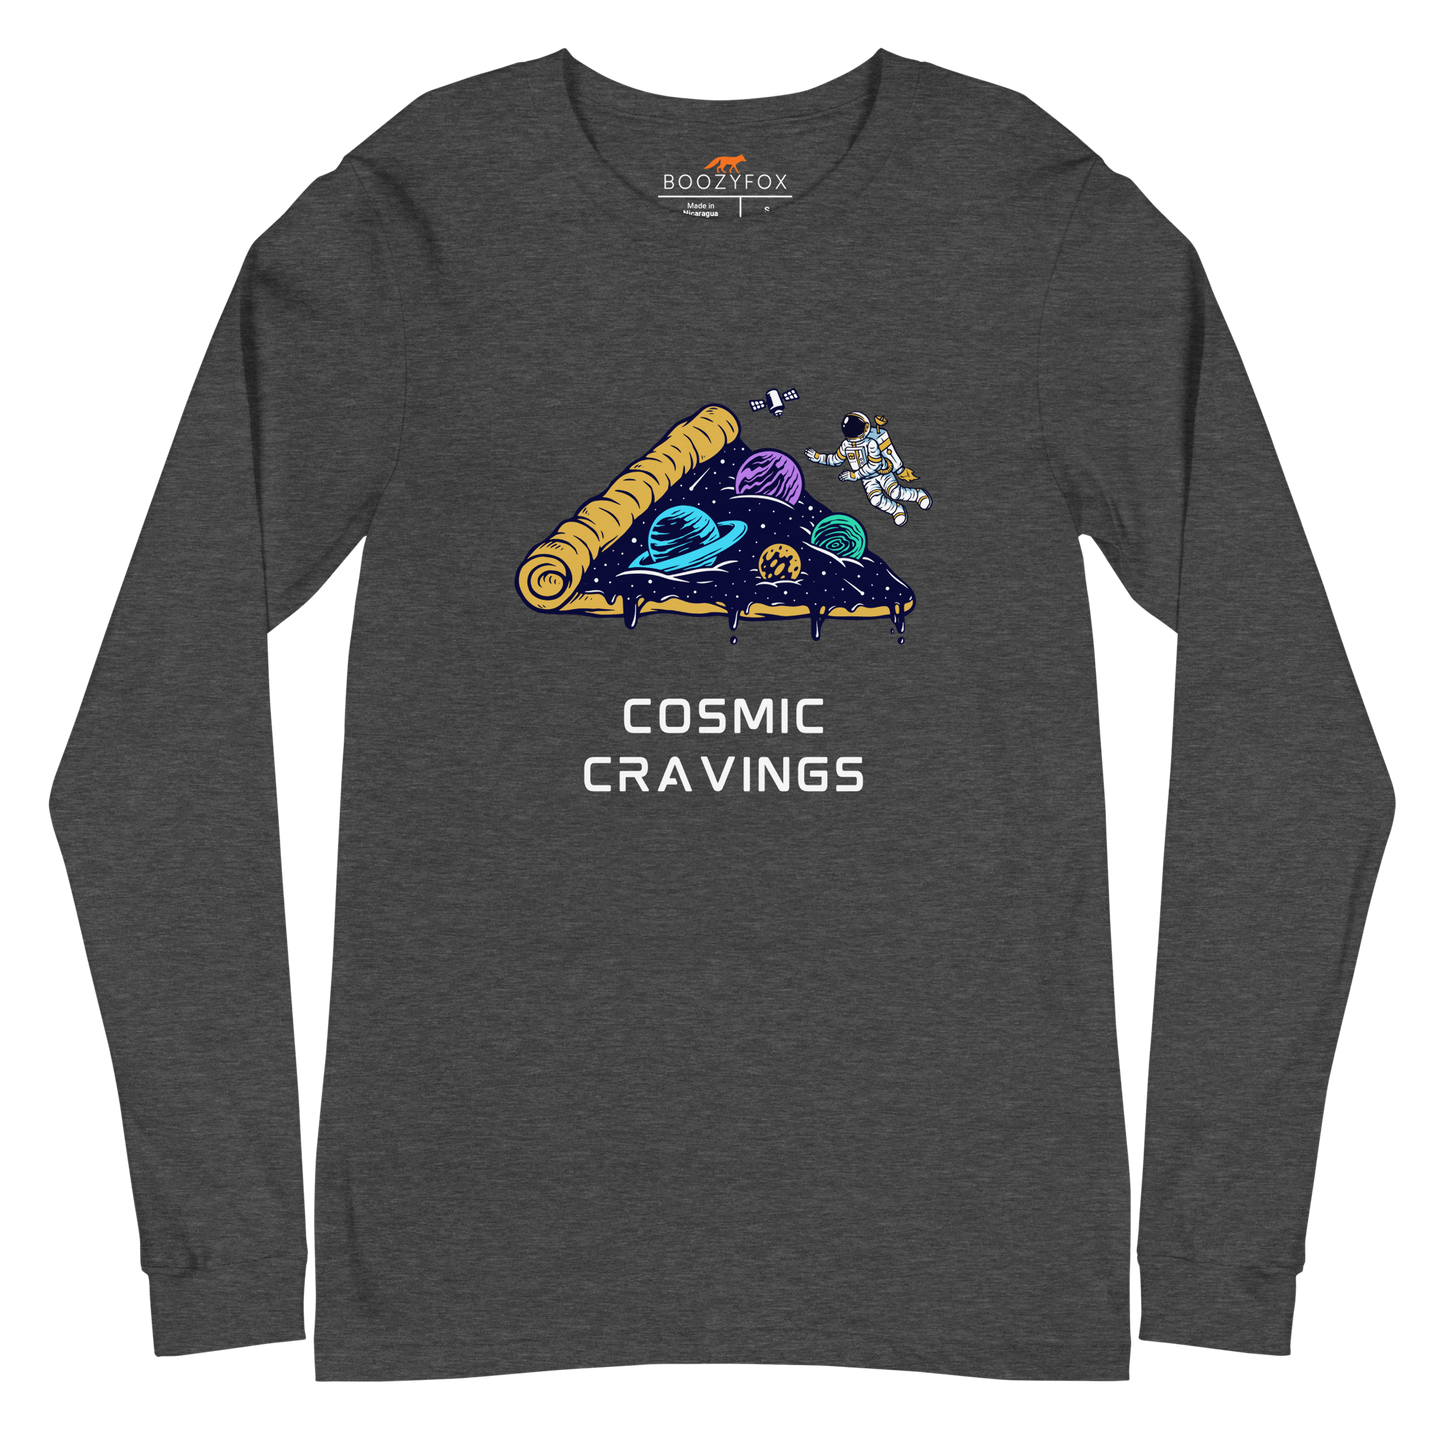 Dark Grey Heather Cosmic Cravings Long Sleeve Tee featuring an Astronaut Exploring a Pizza Universe graphic on the chest - Funny Space Long Sleeve Graphic Tees - Boozy Fox